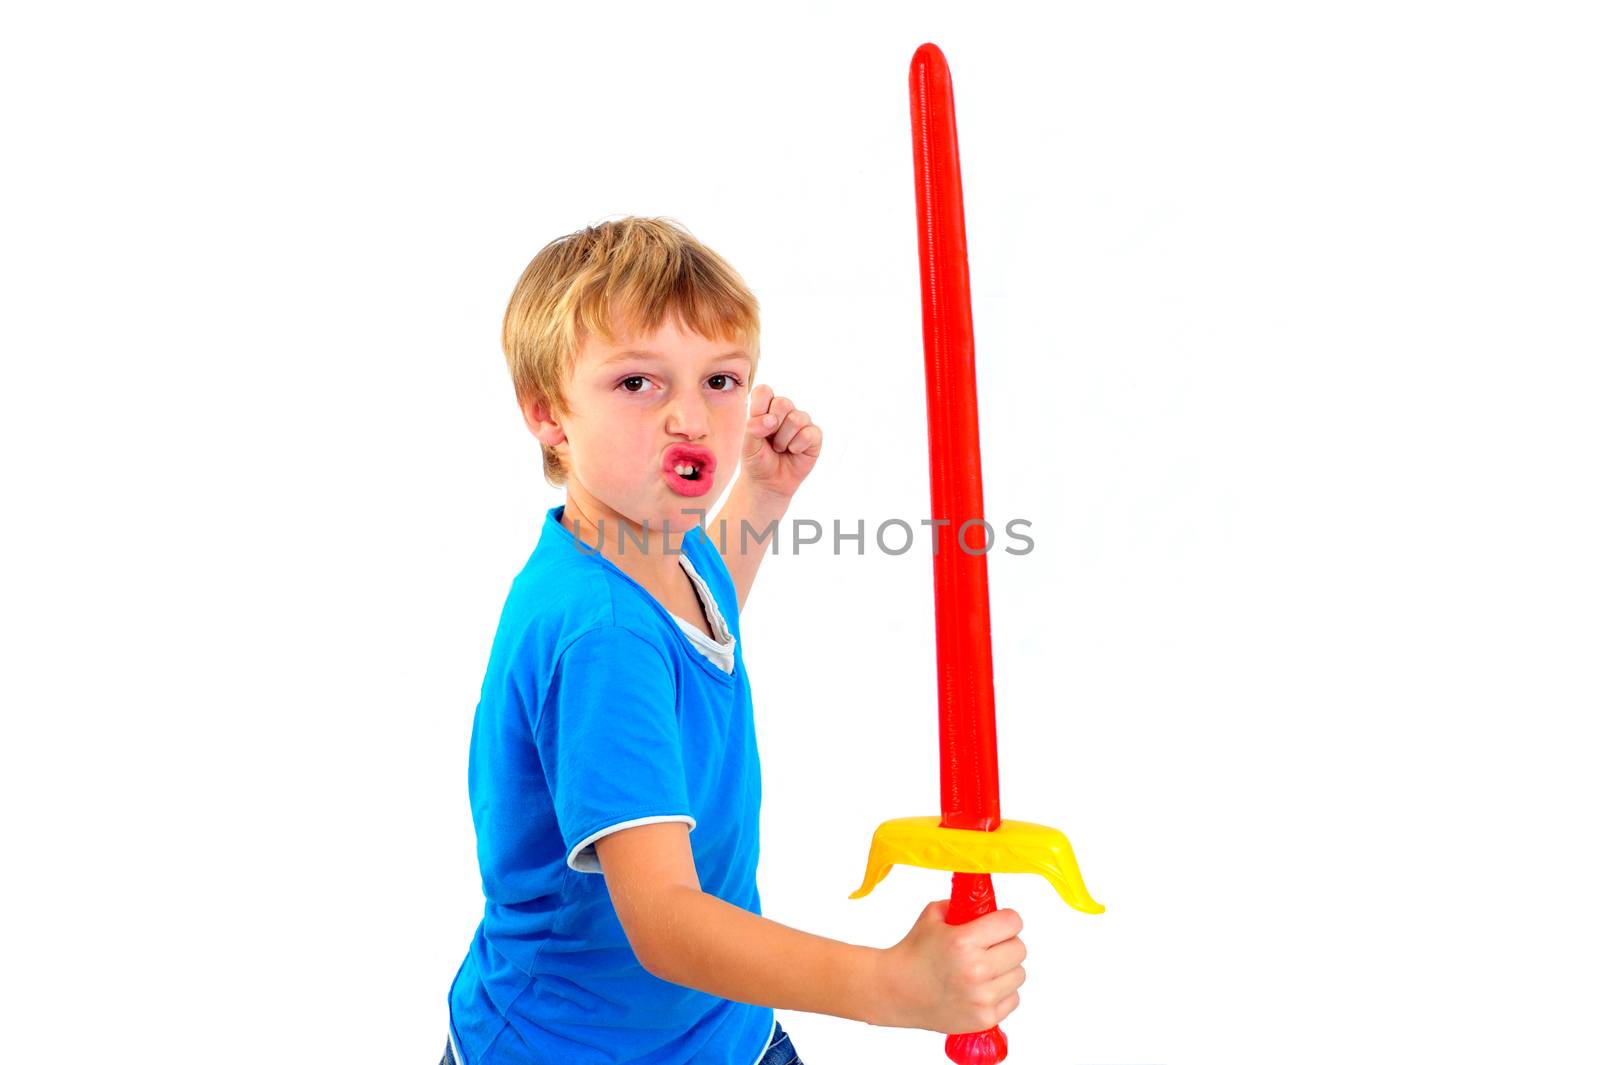 Young boy in studio playing with sword on white background by seawaters